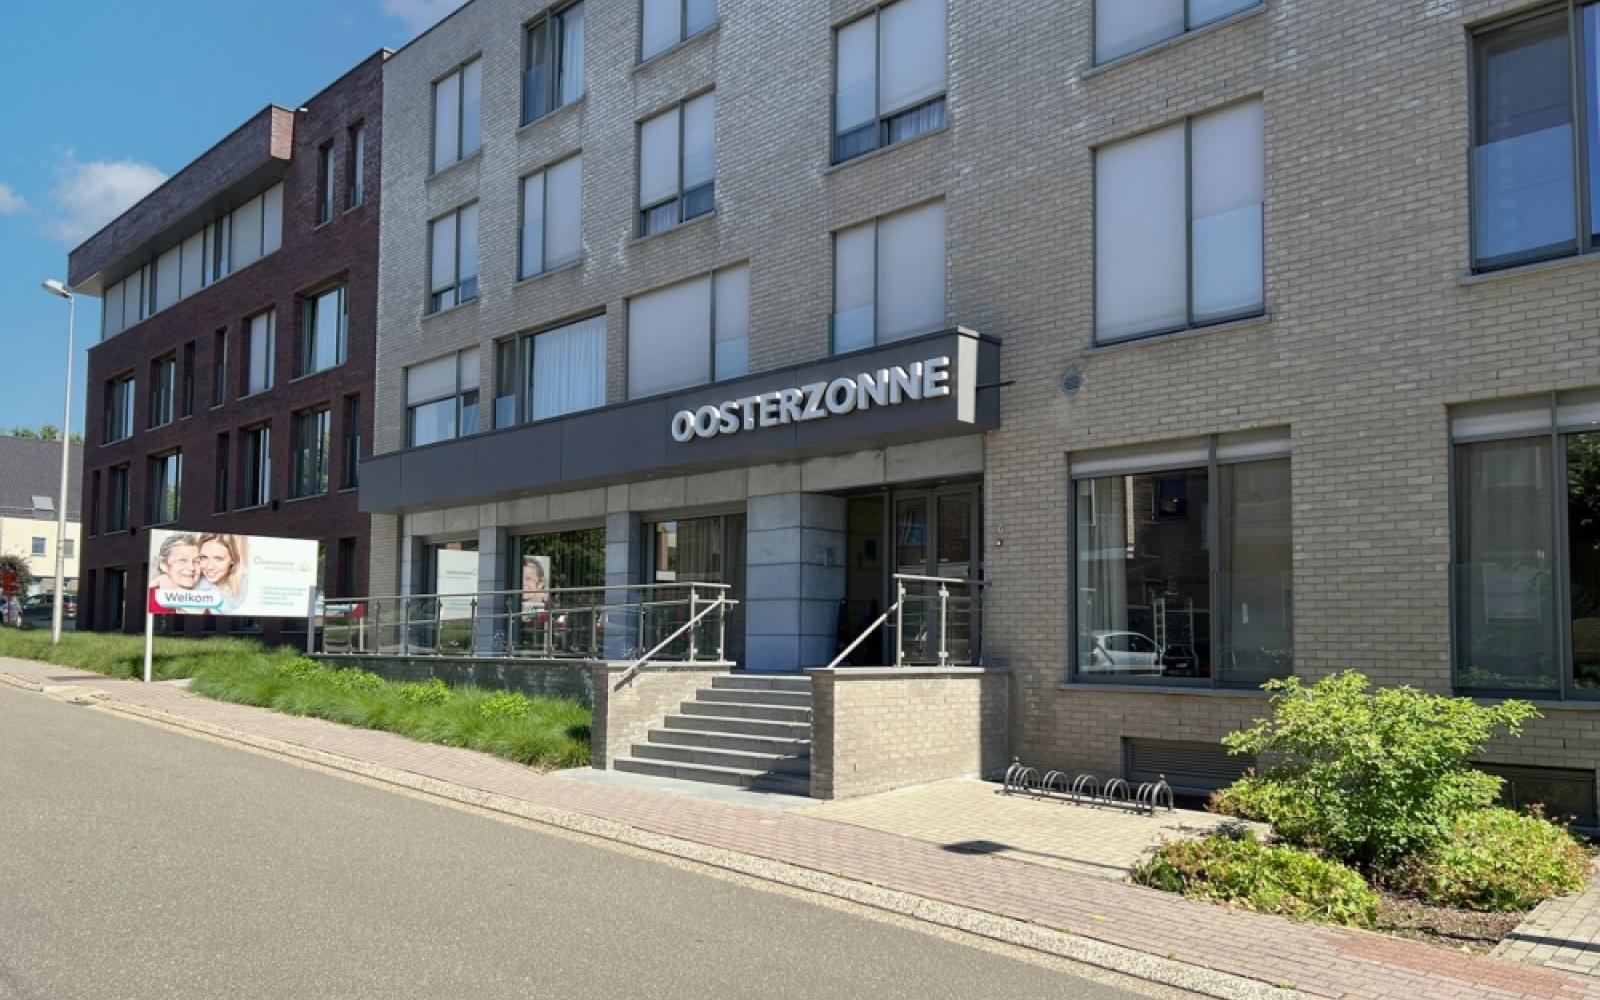 Oosterzonne